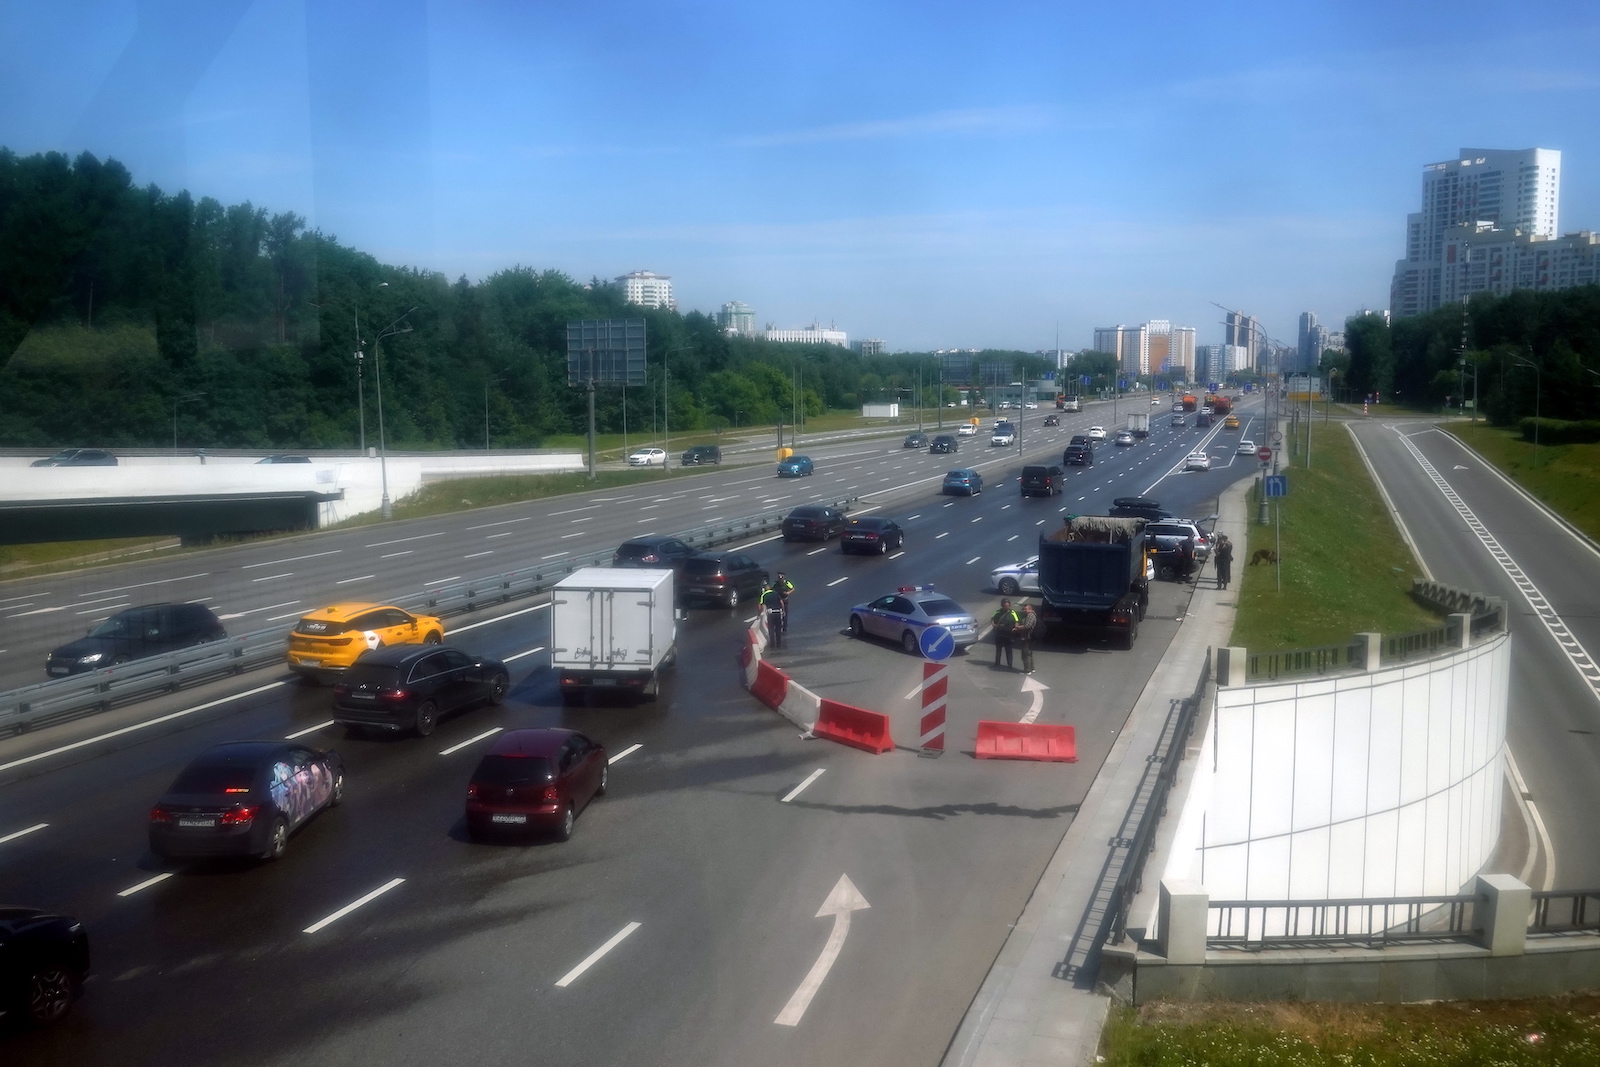 epa10710745 A picture taken through the glass window of a pedestrian bridge of Russian police officers manning a check point at a road running from the Moscow region to Moscow, Russia, 25 June 2023. On 24 June, counter-terrorism measures were enforced in Moscow and other Russian regions after private military company (PMC) Wagner Group's chief claimed that his troops had occupied the building of the headquarters of the Southern Military District in Rostov-on-Don, demanding a meeting with Russia's defense chiefs. Belarusian President Lukashenko, a close ally of Putin, negotiated a deal with Wagner chief Prigozhin to stop the movement of the group's fighters across Russia, the press service of the President of Belarus reported. The negotiations were said to have lasted for the entire day. Prigozhin announced that Wagner fighters were turning their columns around and going back in the other direction, returning to their field camps.  EPA/MAXIM SHIPENKOV